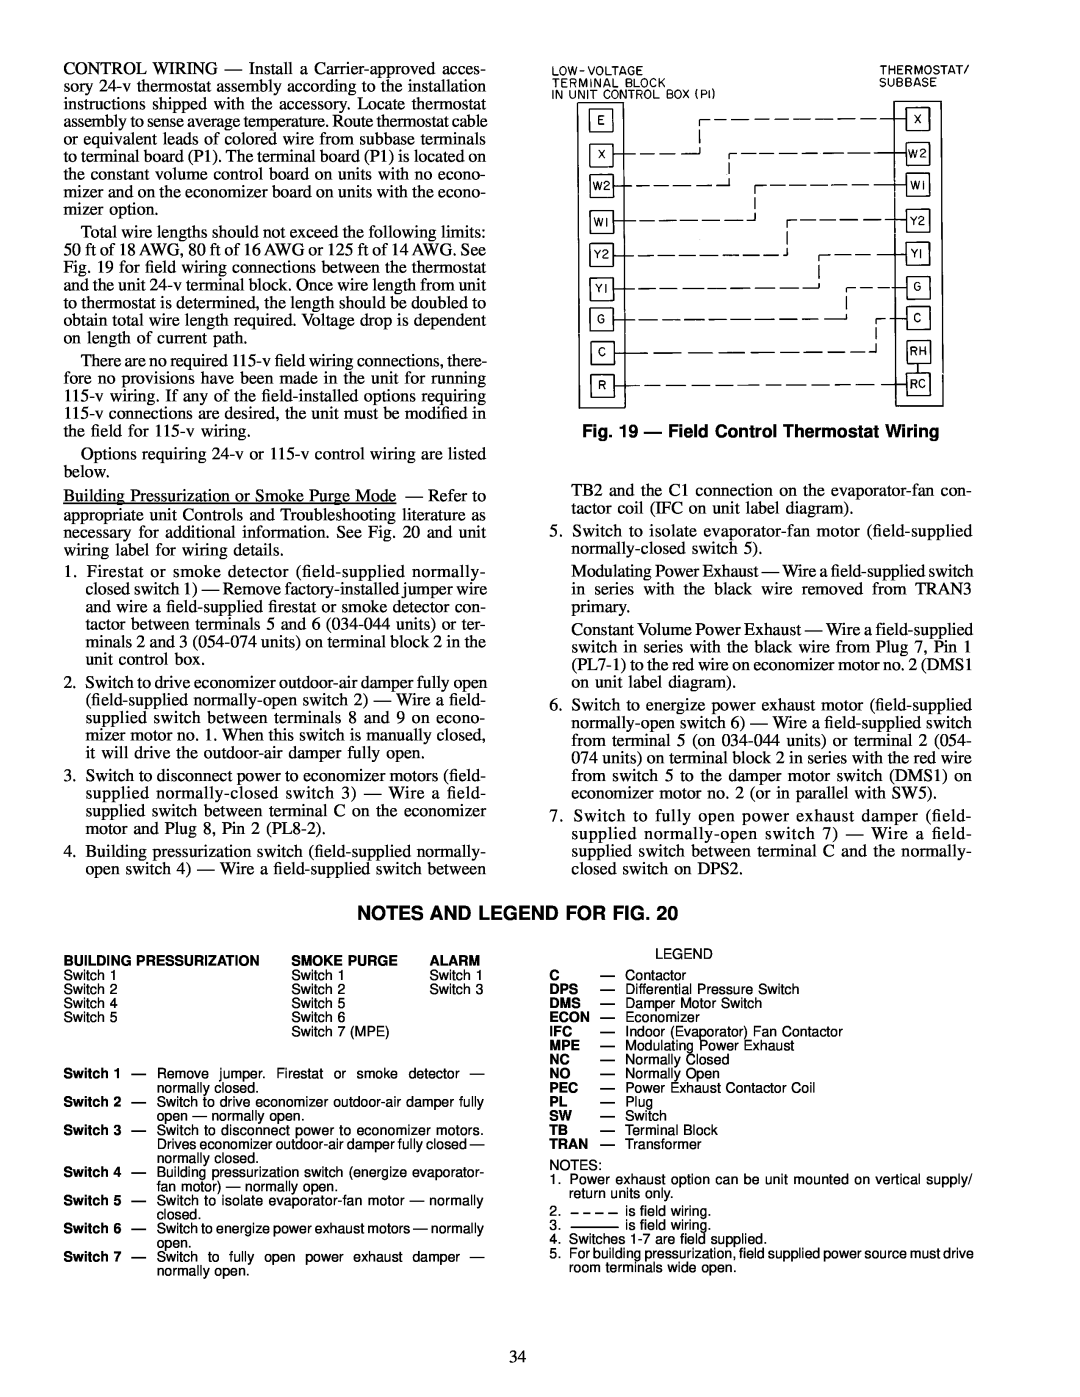 Carrier NP034-074 specifications Notes And Legend For Fig, Ð Field Control Thermostat Wiring 